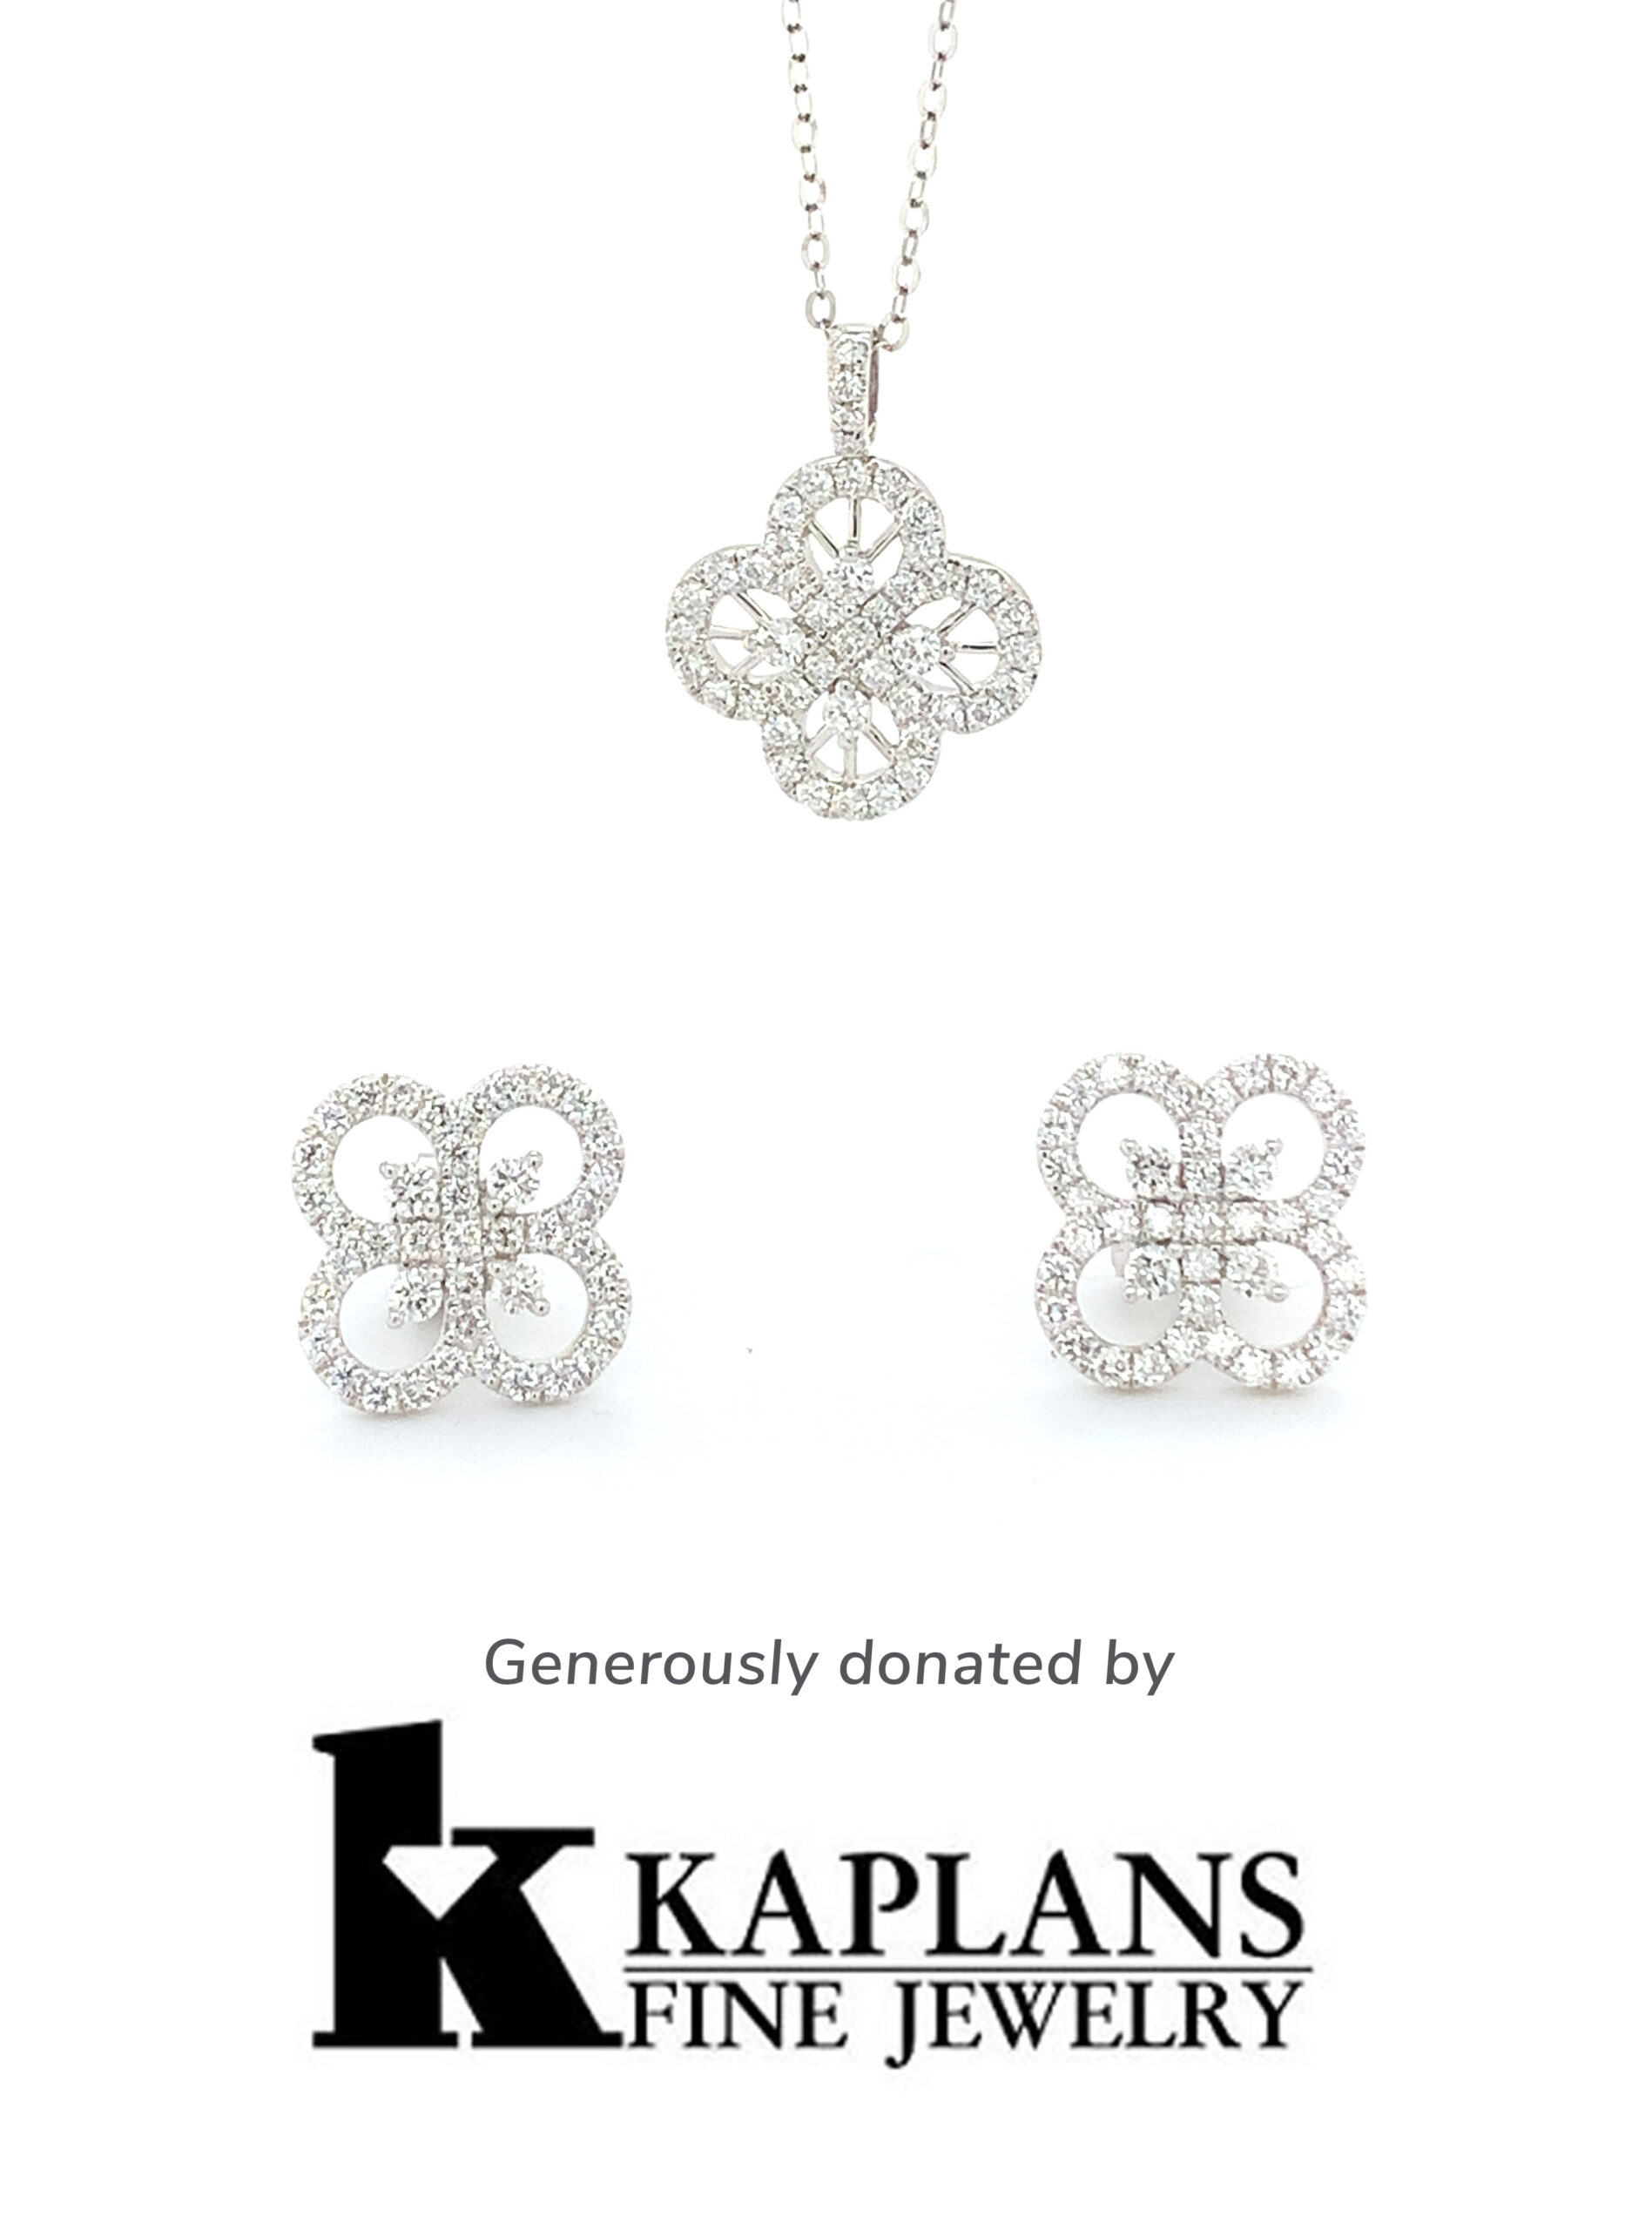 Donated-by-Kaplans-Fine-Jewelry